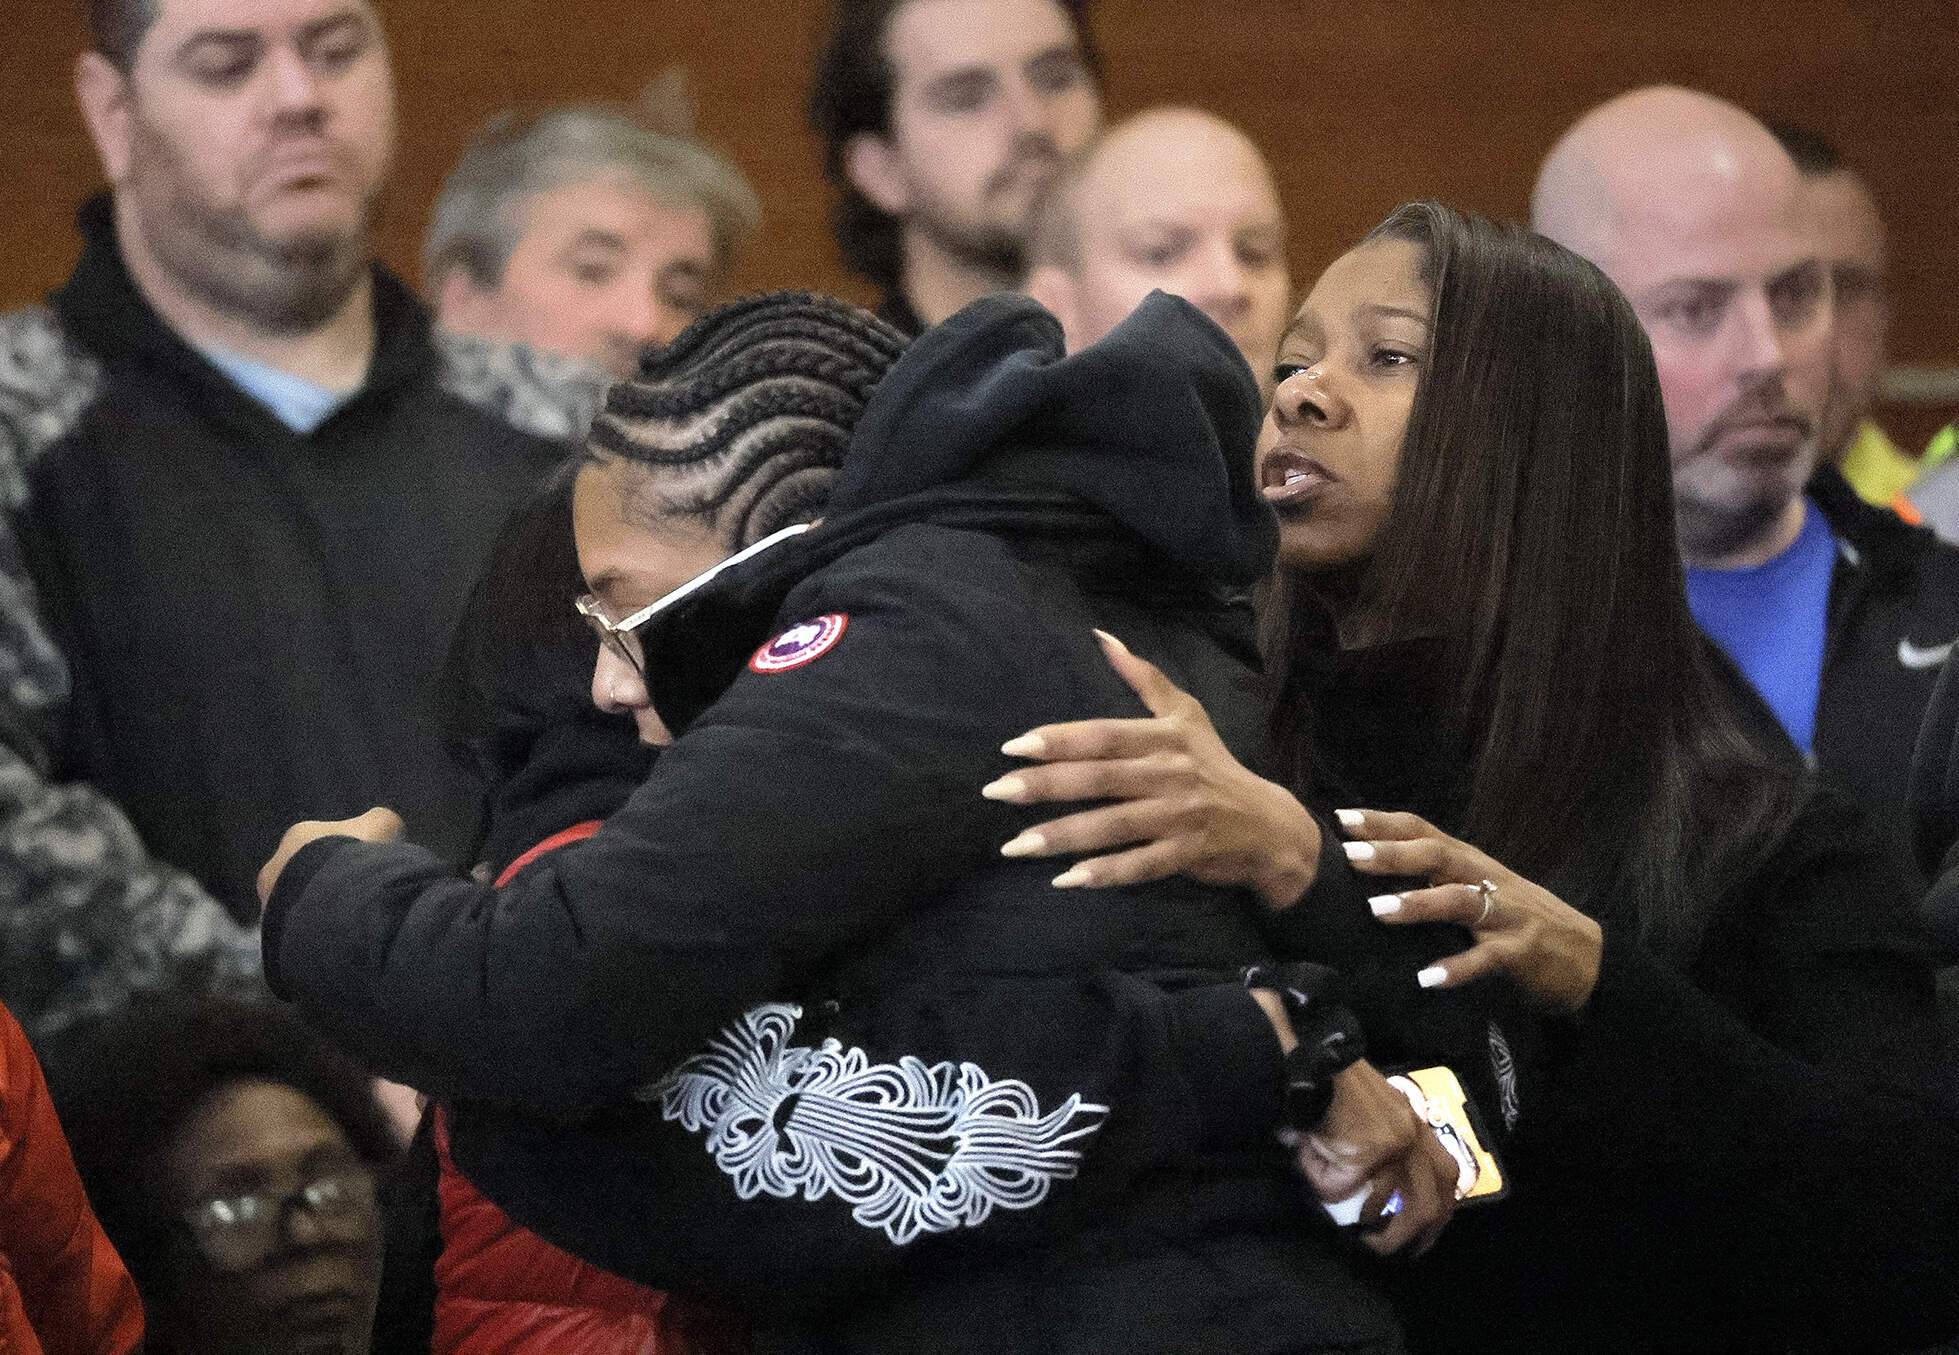 Family, police, and utility workers in the court room before the arraignment on Thursday. (Lane Turner/The Boston Globe via AP, Pool)